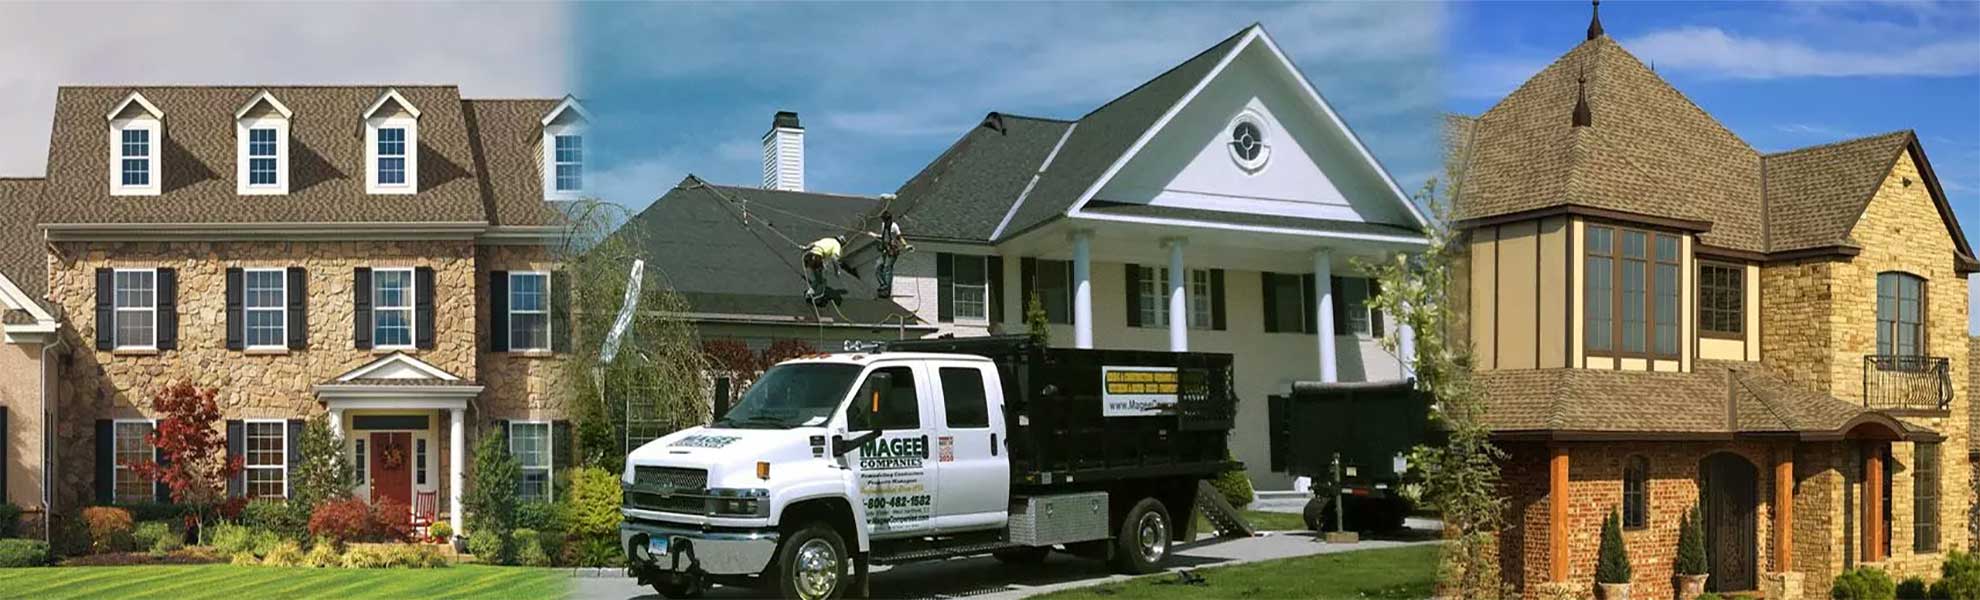 Magee Roofing Company work truck and crew at work